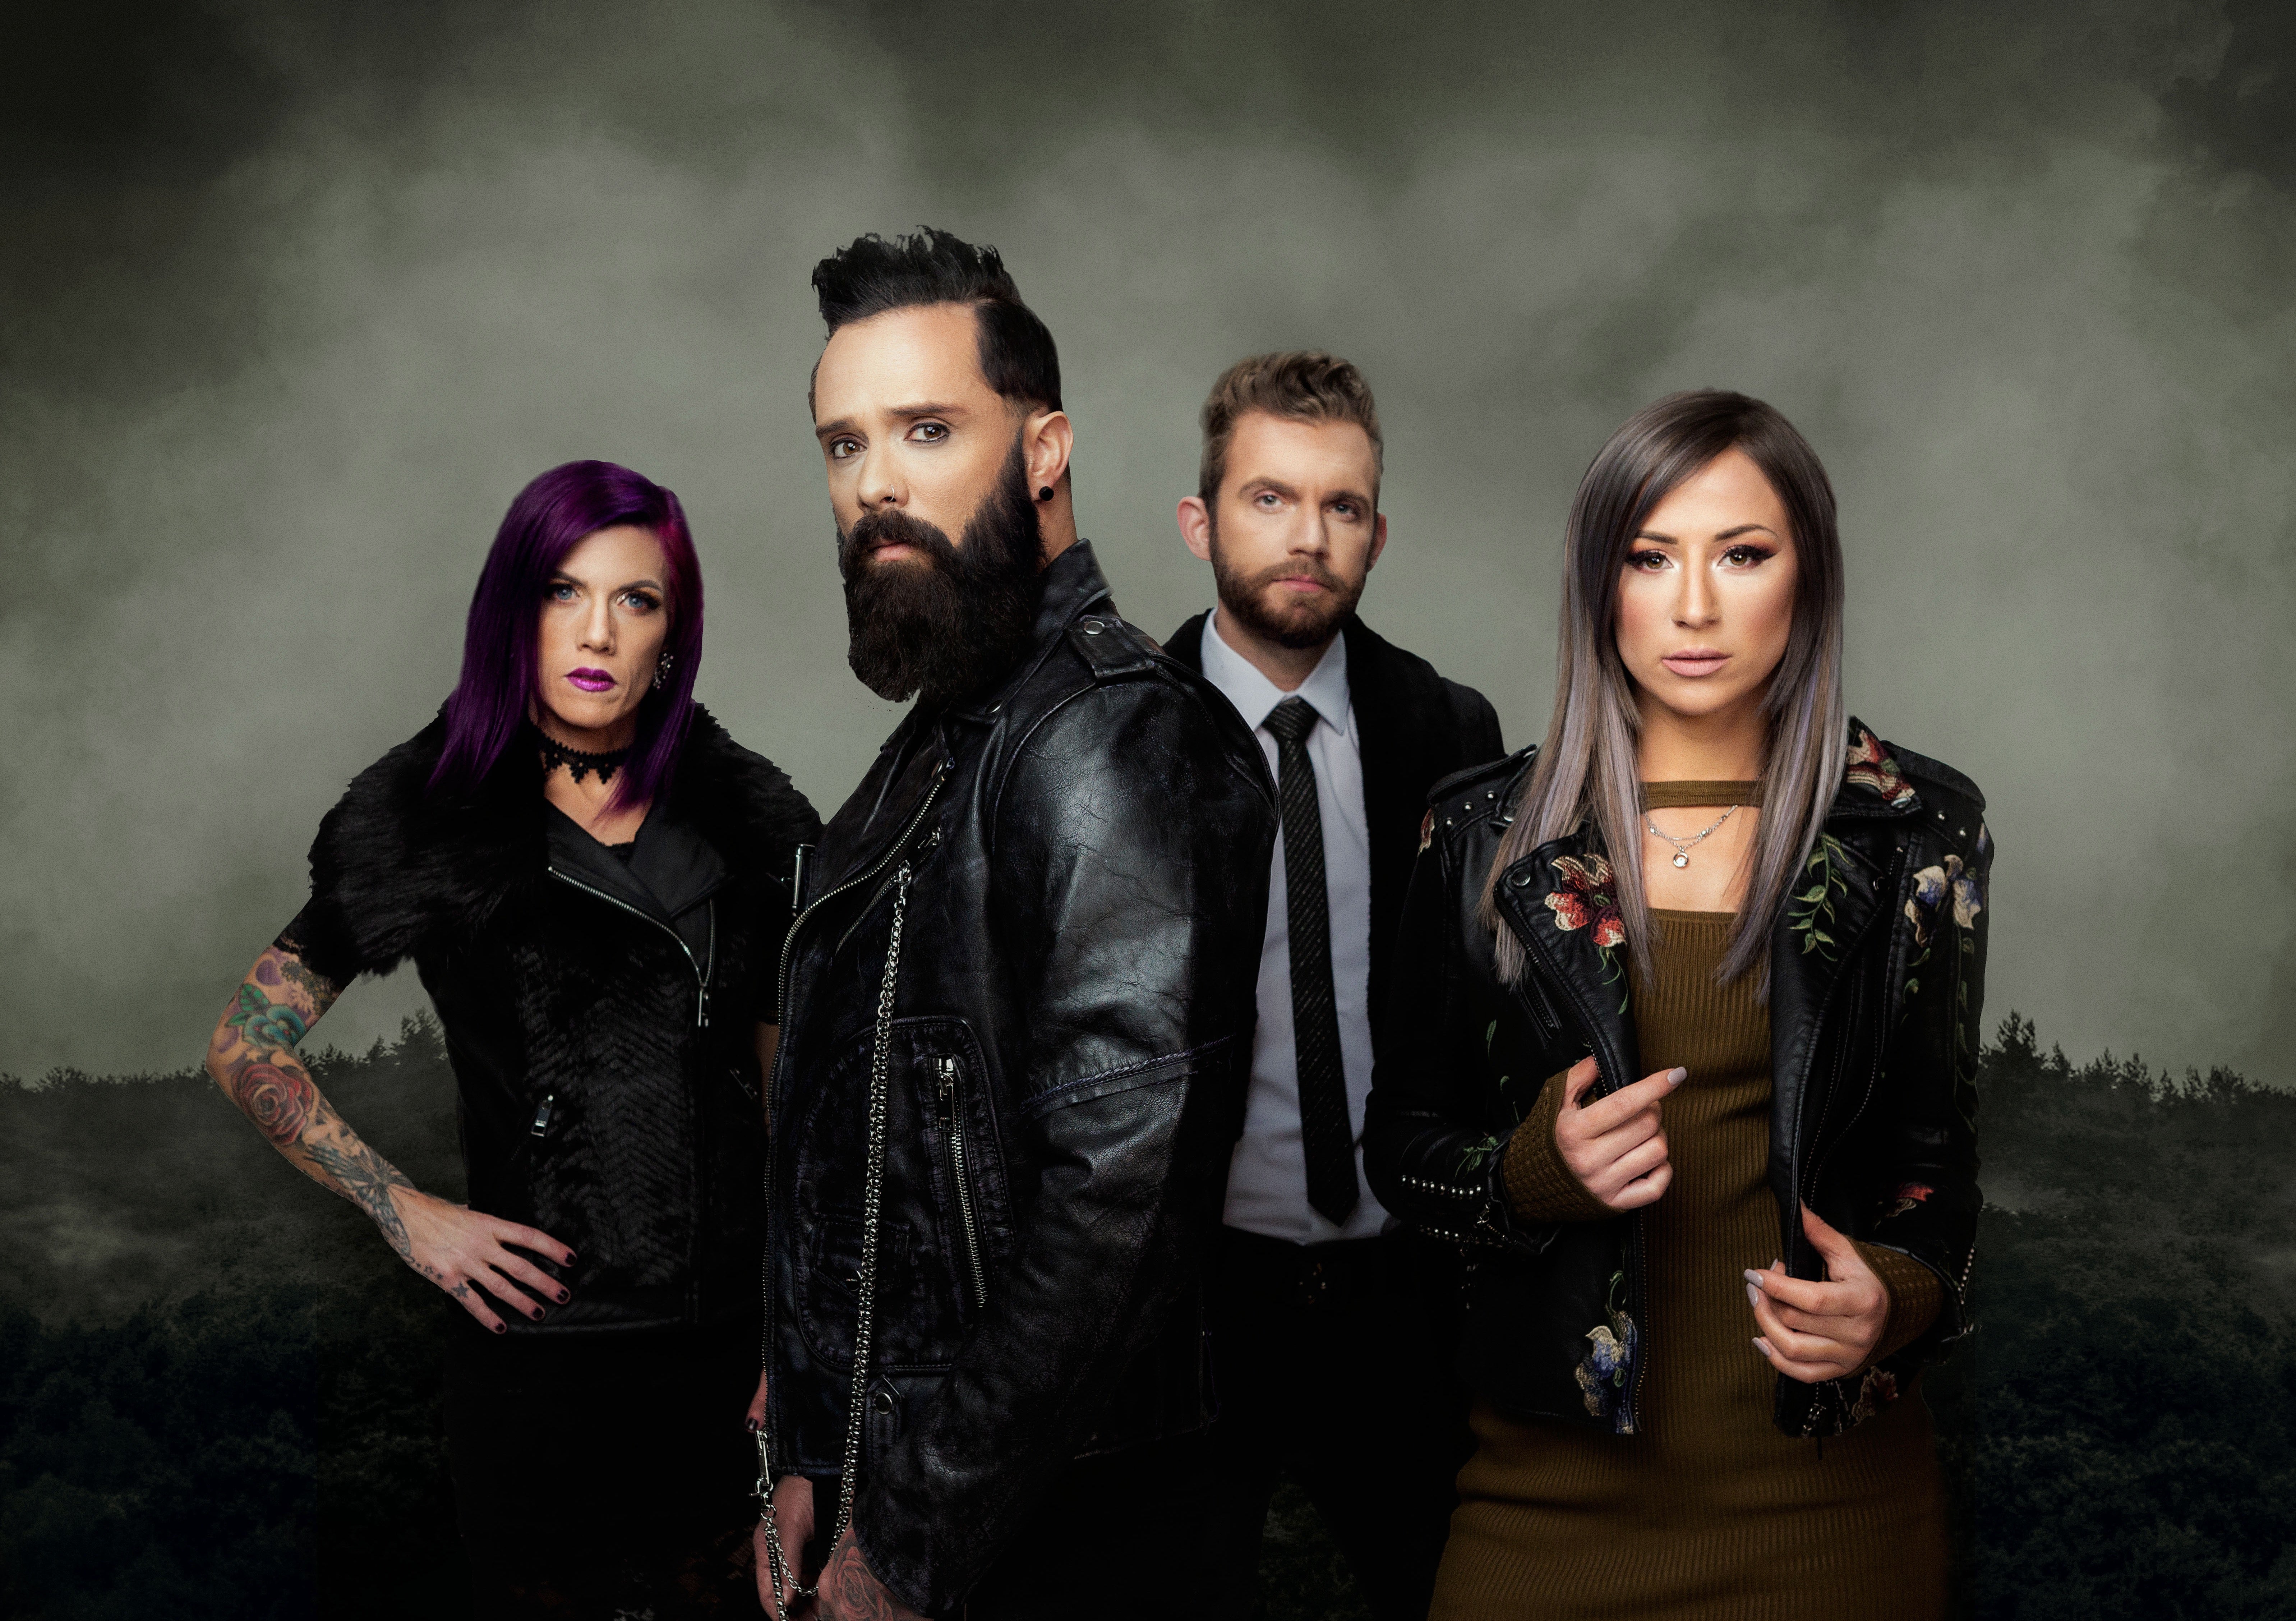 As the world began to shut down, Skillet was in the midst of touring their ...